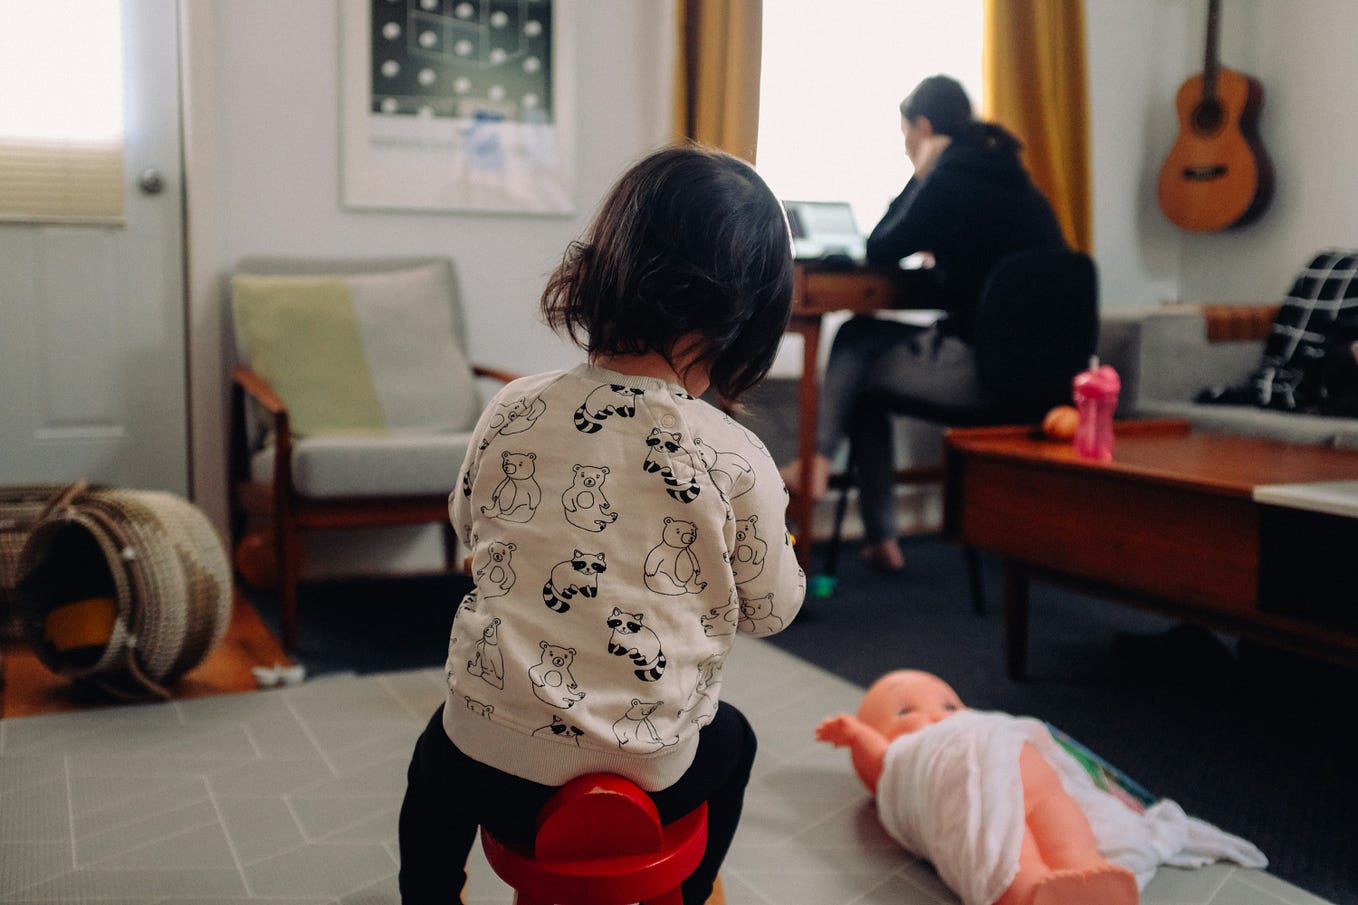 A little girl sits on a stool, facing her mother who is working at her desk, back turned to her.